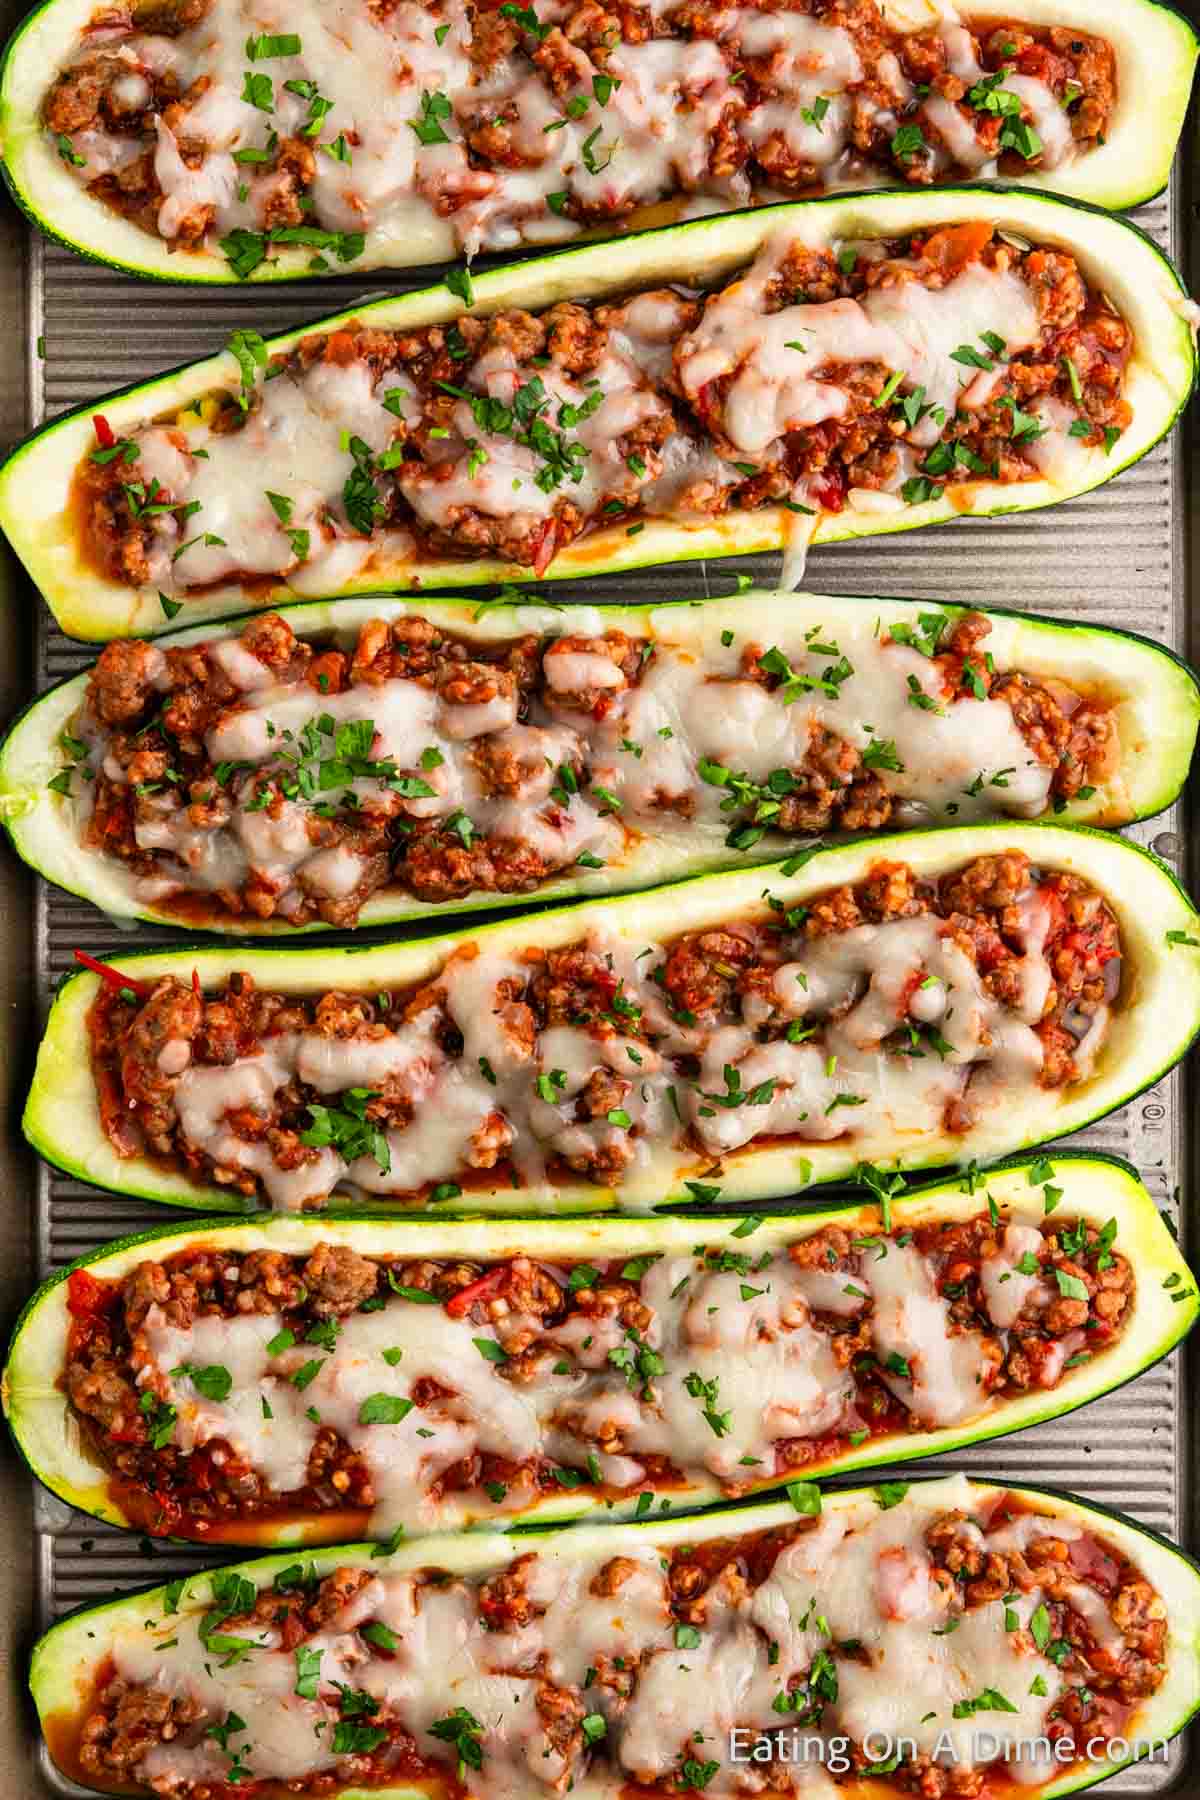 A baking tray filled with zucchini boats stuffed with a hearty mixture of ground meat, diced vegetables, and topped with melted cheese and freshly chopped herbs—the perfect stuffed zucchini boats recipe.